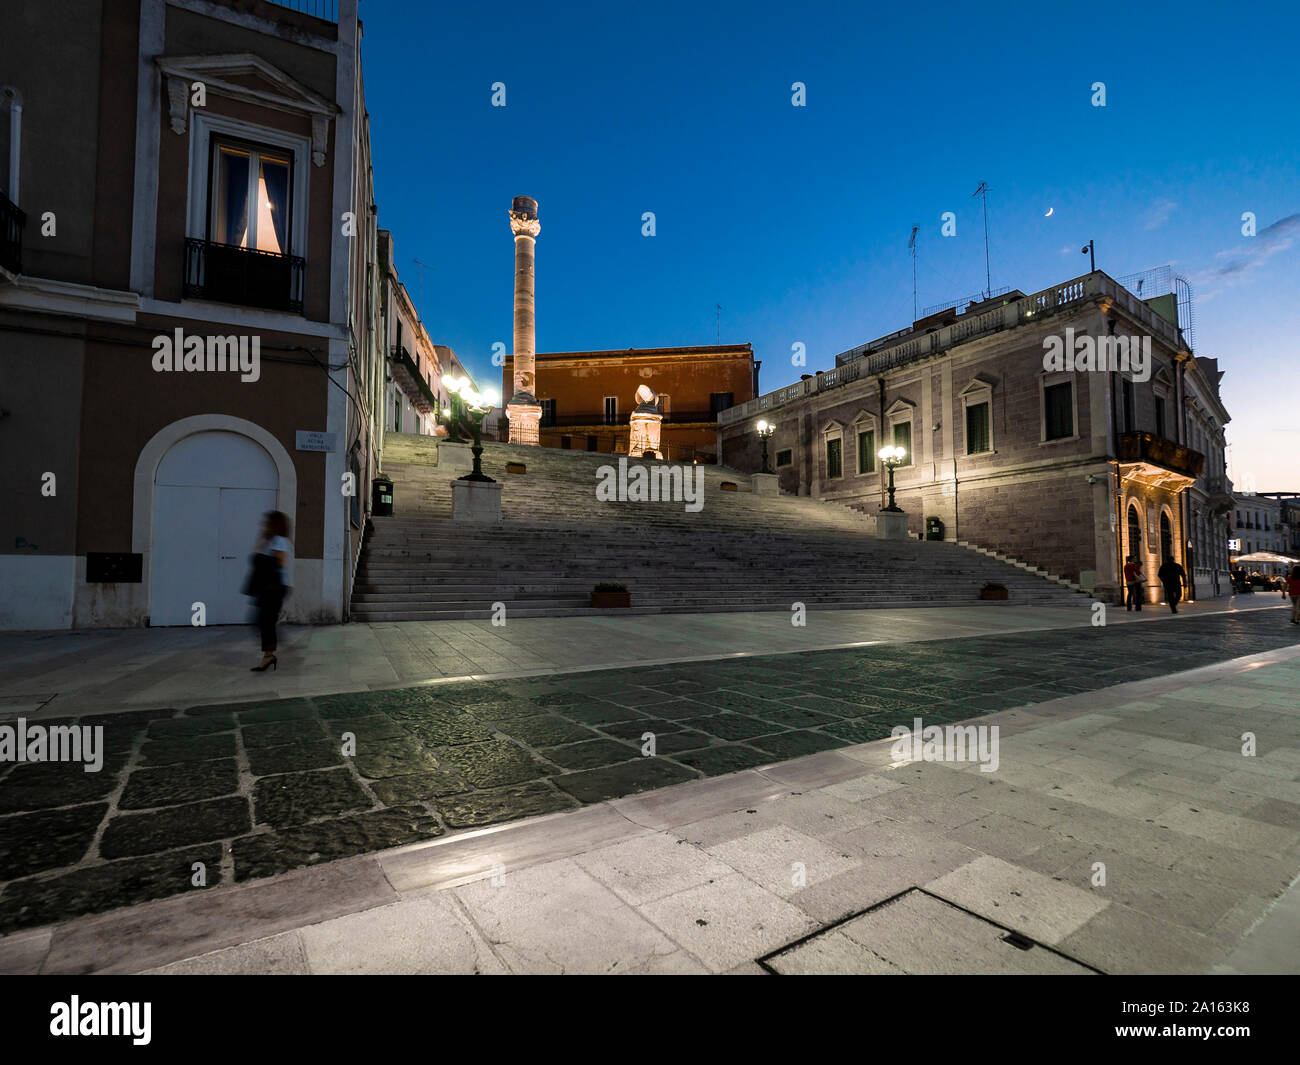 Illuminated Roman column on steps amidst buildings in Brindisi against sky at night Stock Photo